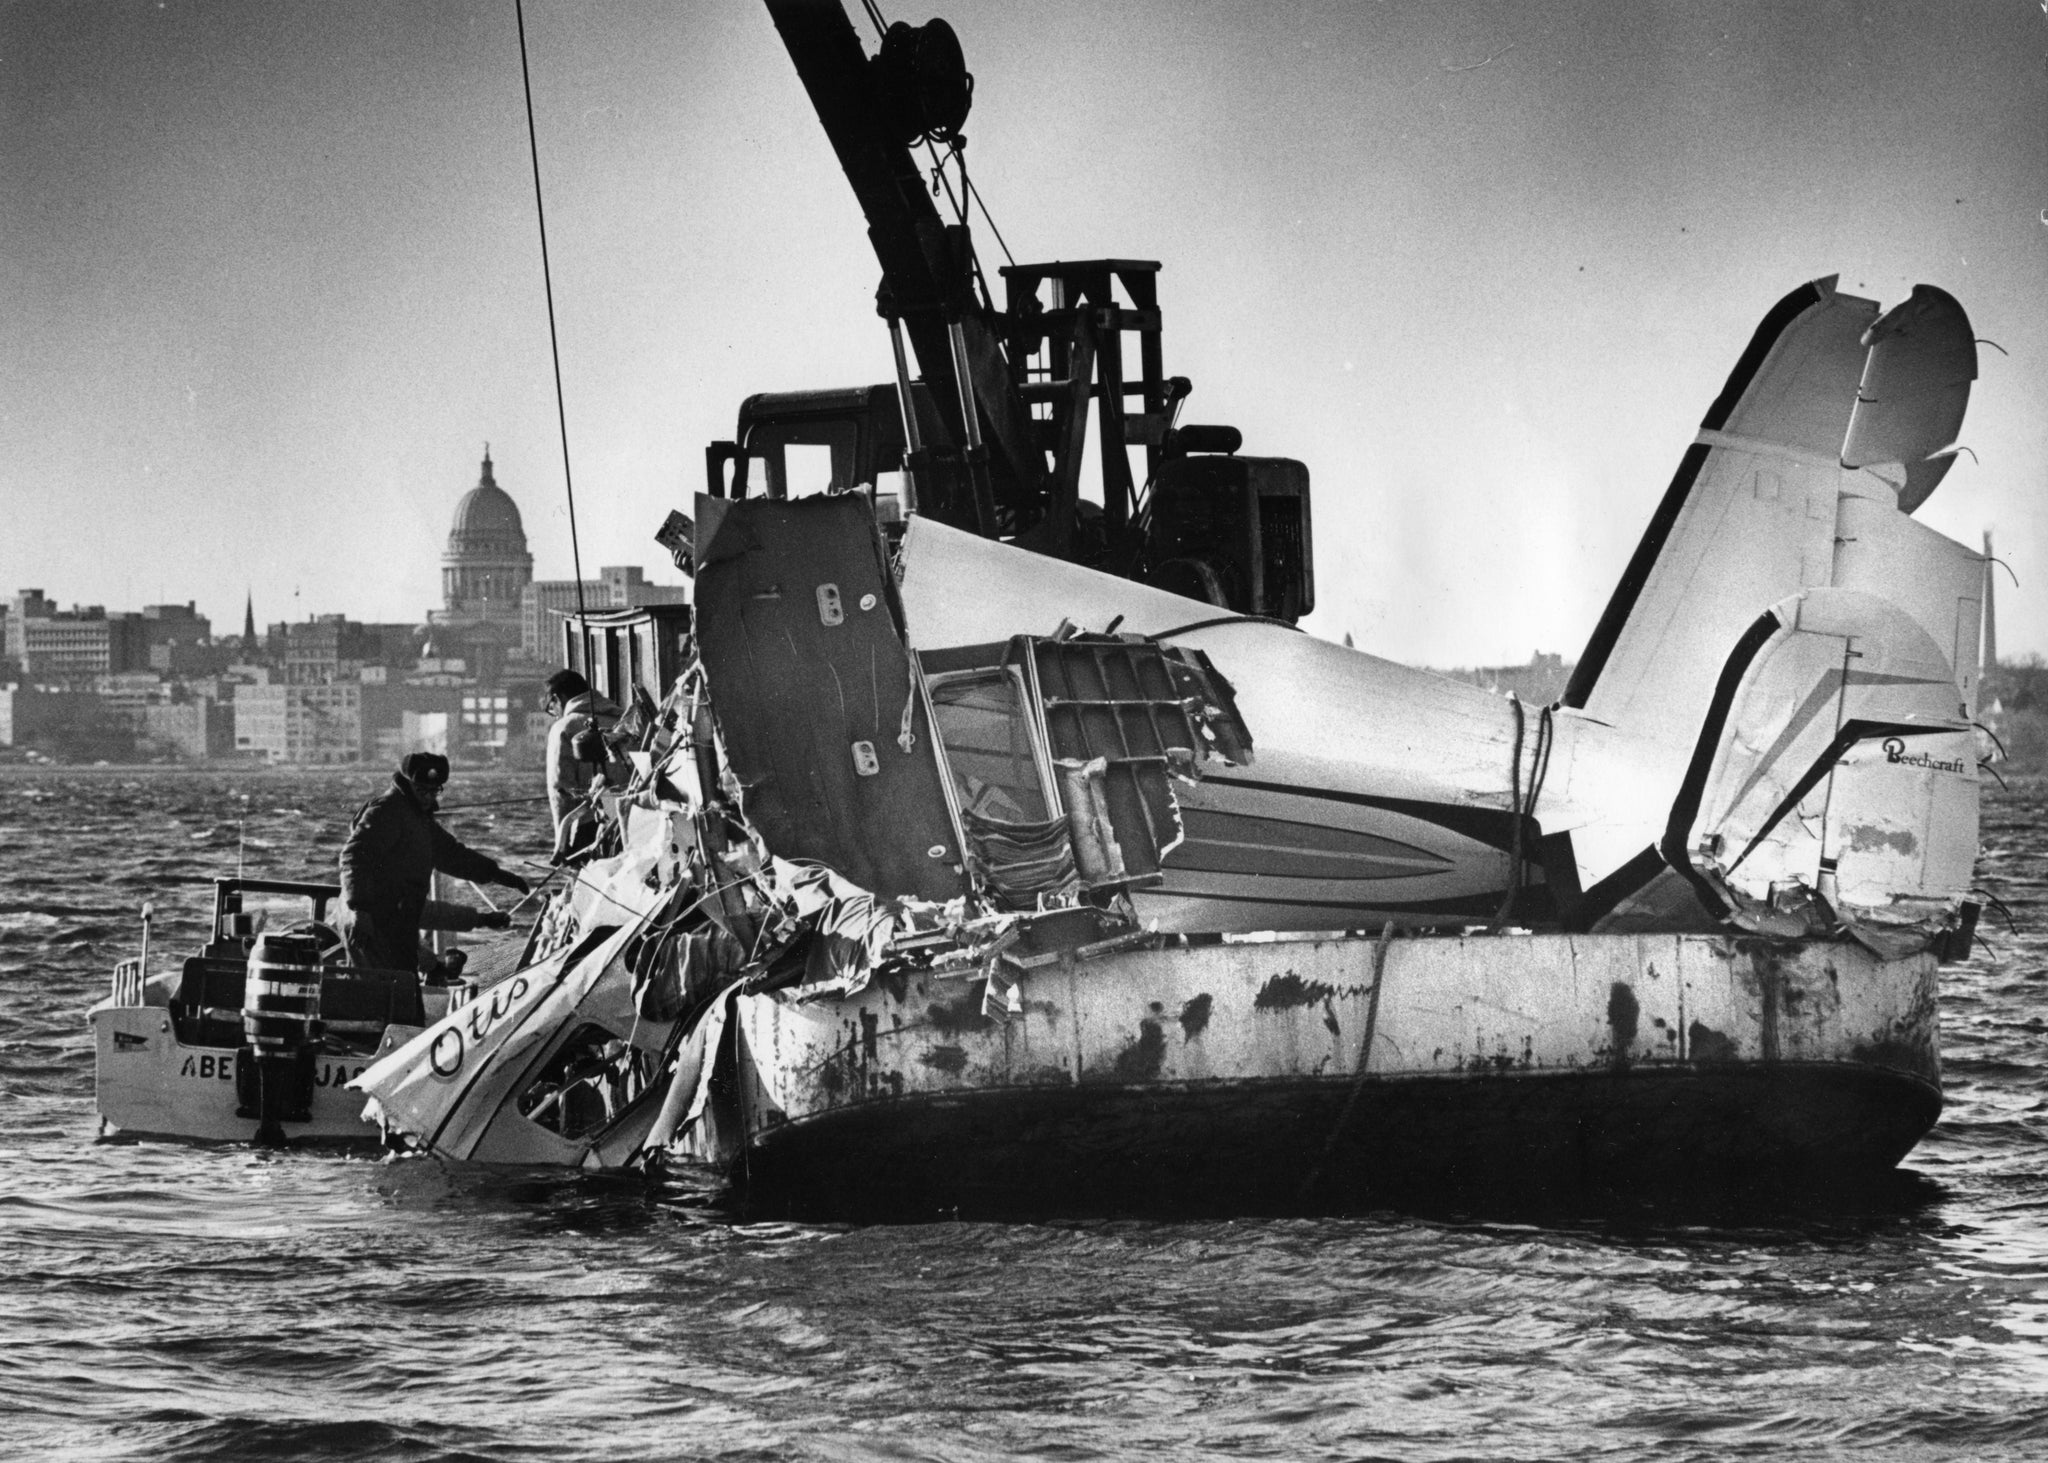 The wreckage of soul and R&B star Otis Redding's Beechcraft H18 aircraft being pulled out of Lake Monona in December 1967. The plane crashed in poor weather on December 10, killing Redding, fellow musicians Matthew Kelly, Jimmy King, Phalon Jones, Ronnie Caldwell, Carl Cunningham, and pilot Richard Fraser. -- Wisconsin State Journal